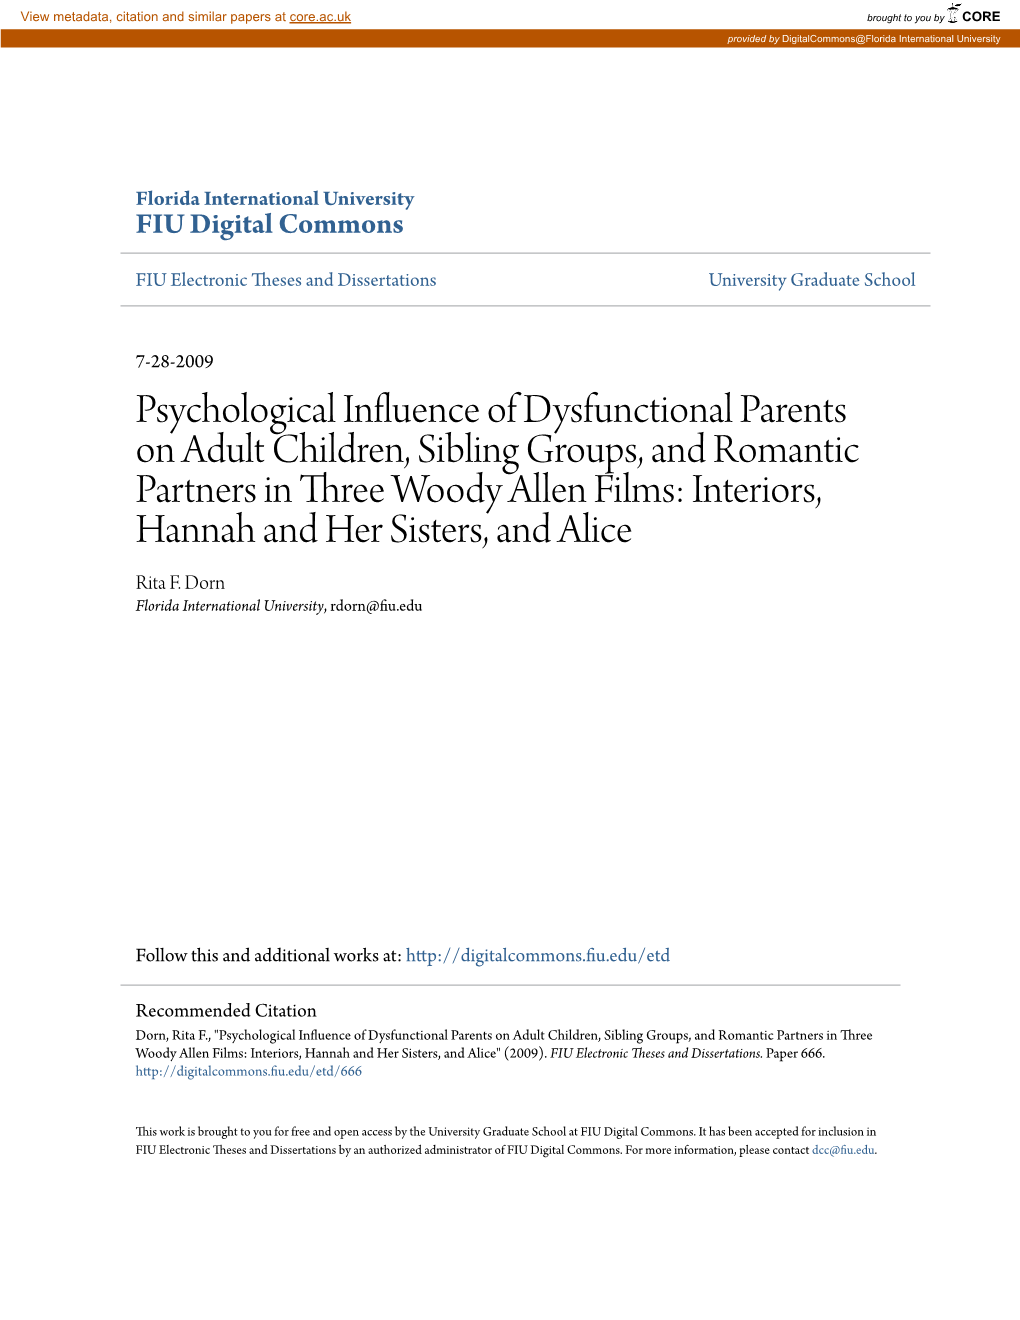 Psychological Influence of Dysfunctional Parents on Adult